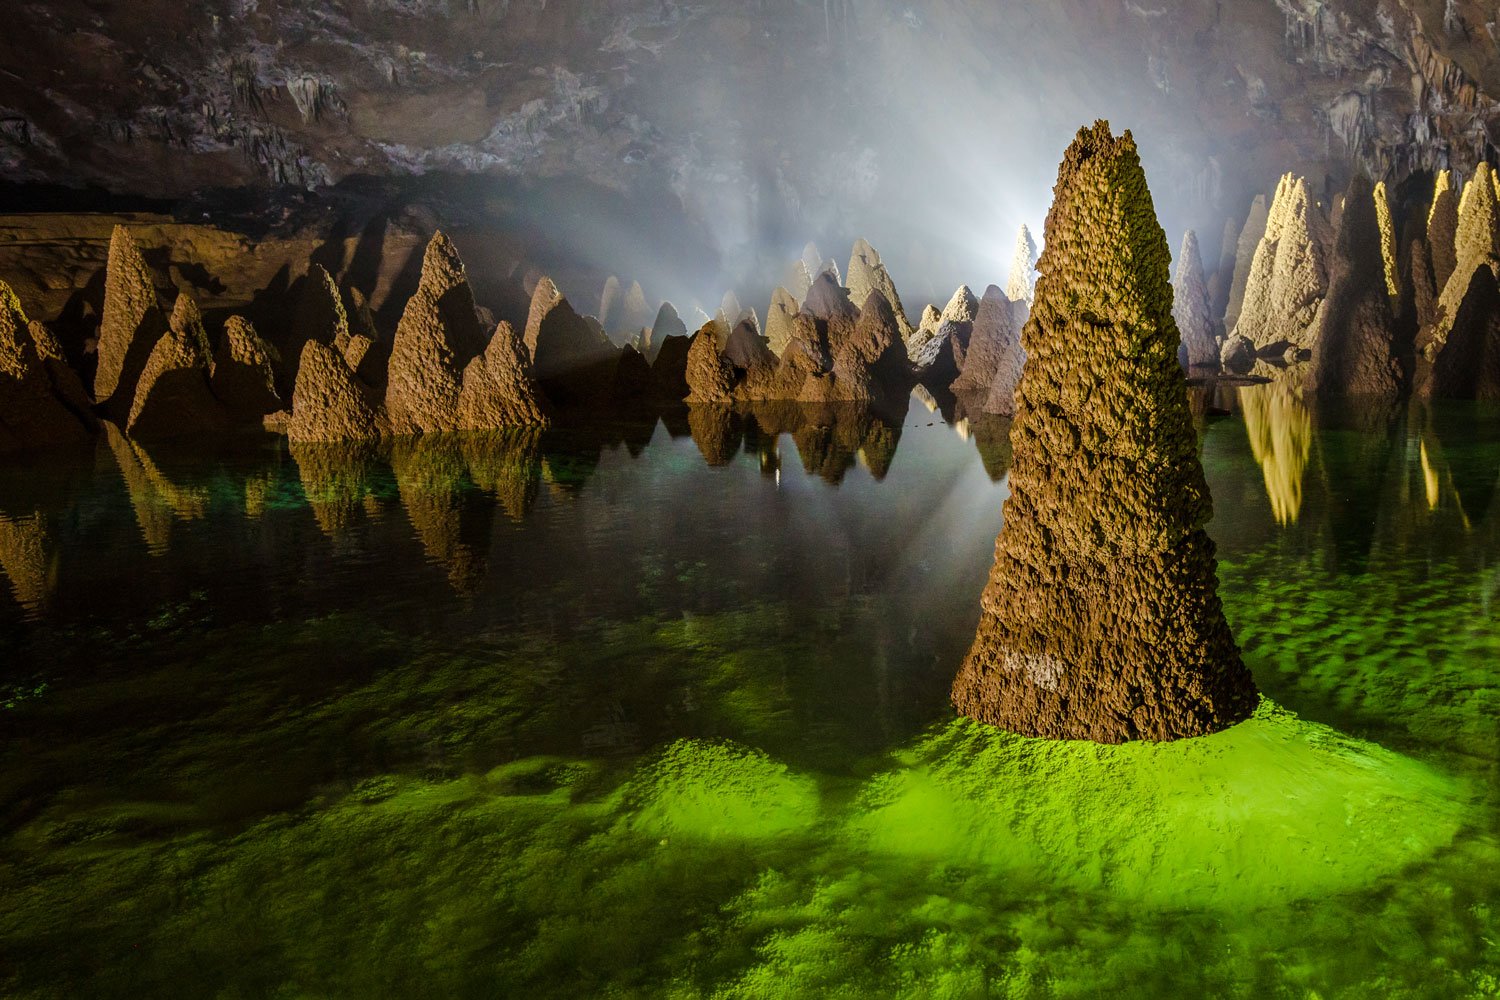 Spring is a great opportunity for visitors to admire the emerald green lakes containing stalagmite towers inside.